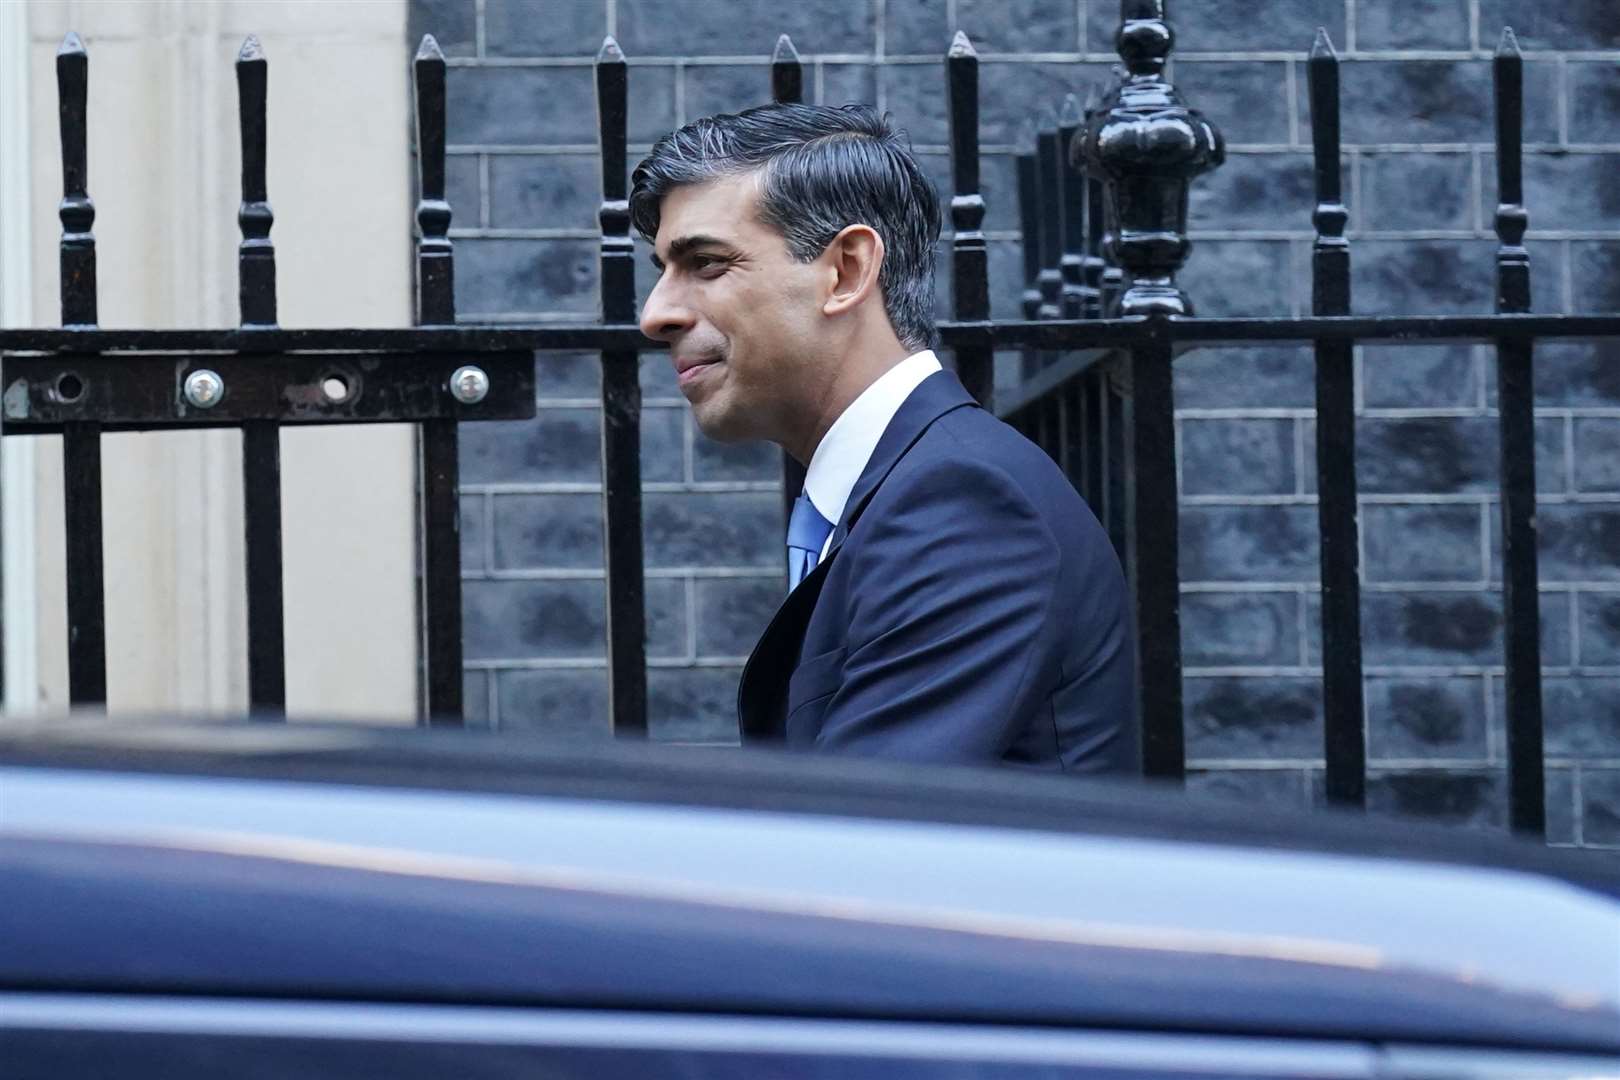 A poll suggests Rishi Sunak’s Conservative Party will be convincingly defeated at the next general election (PA)